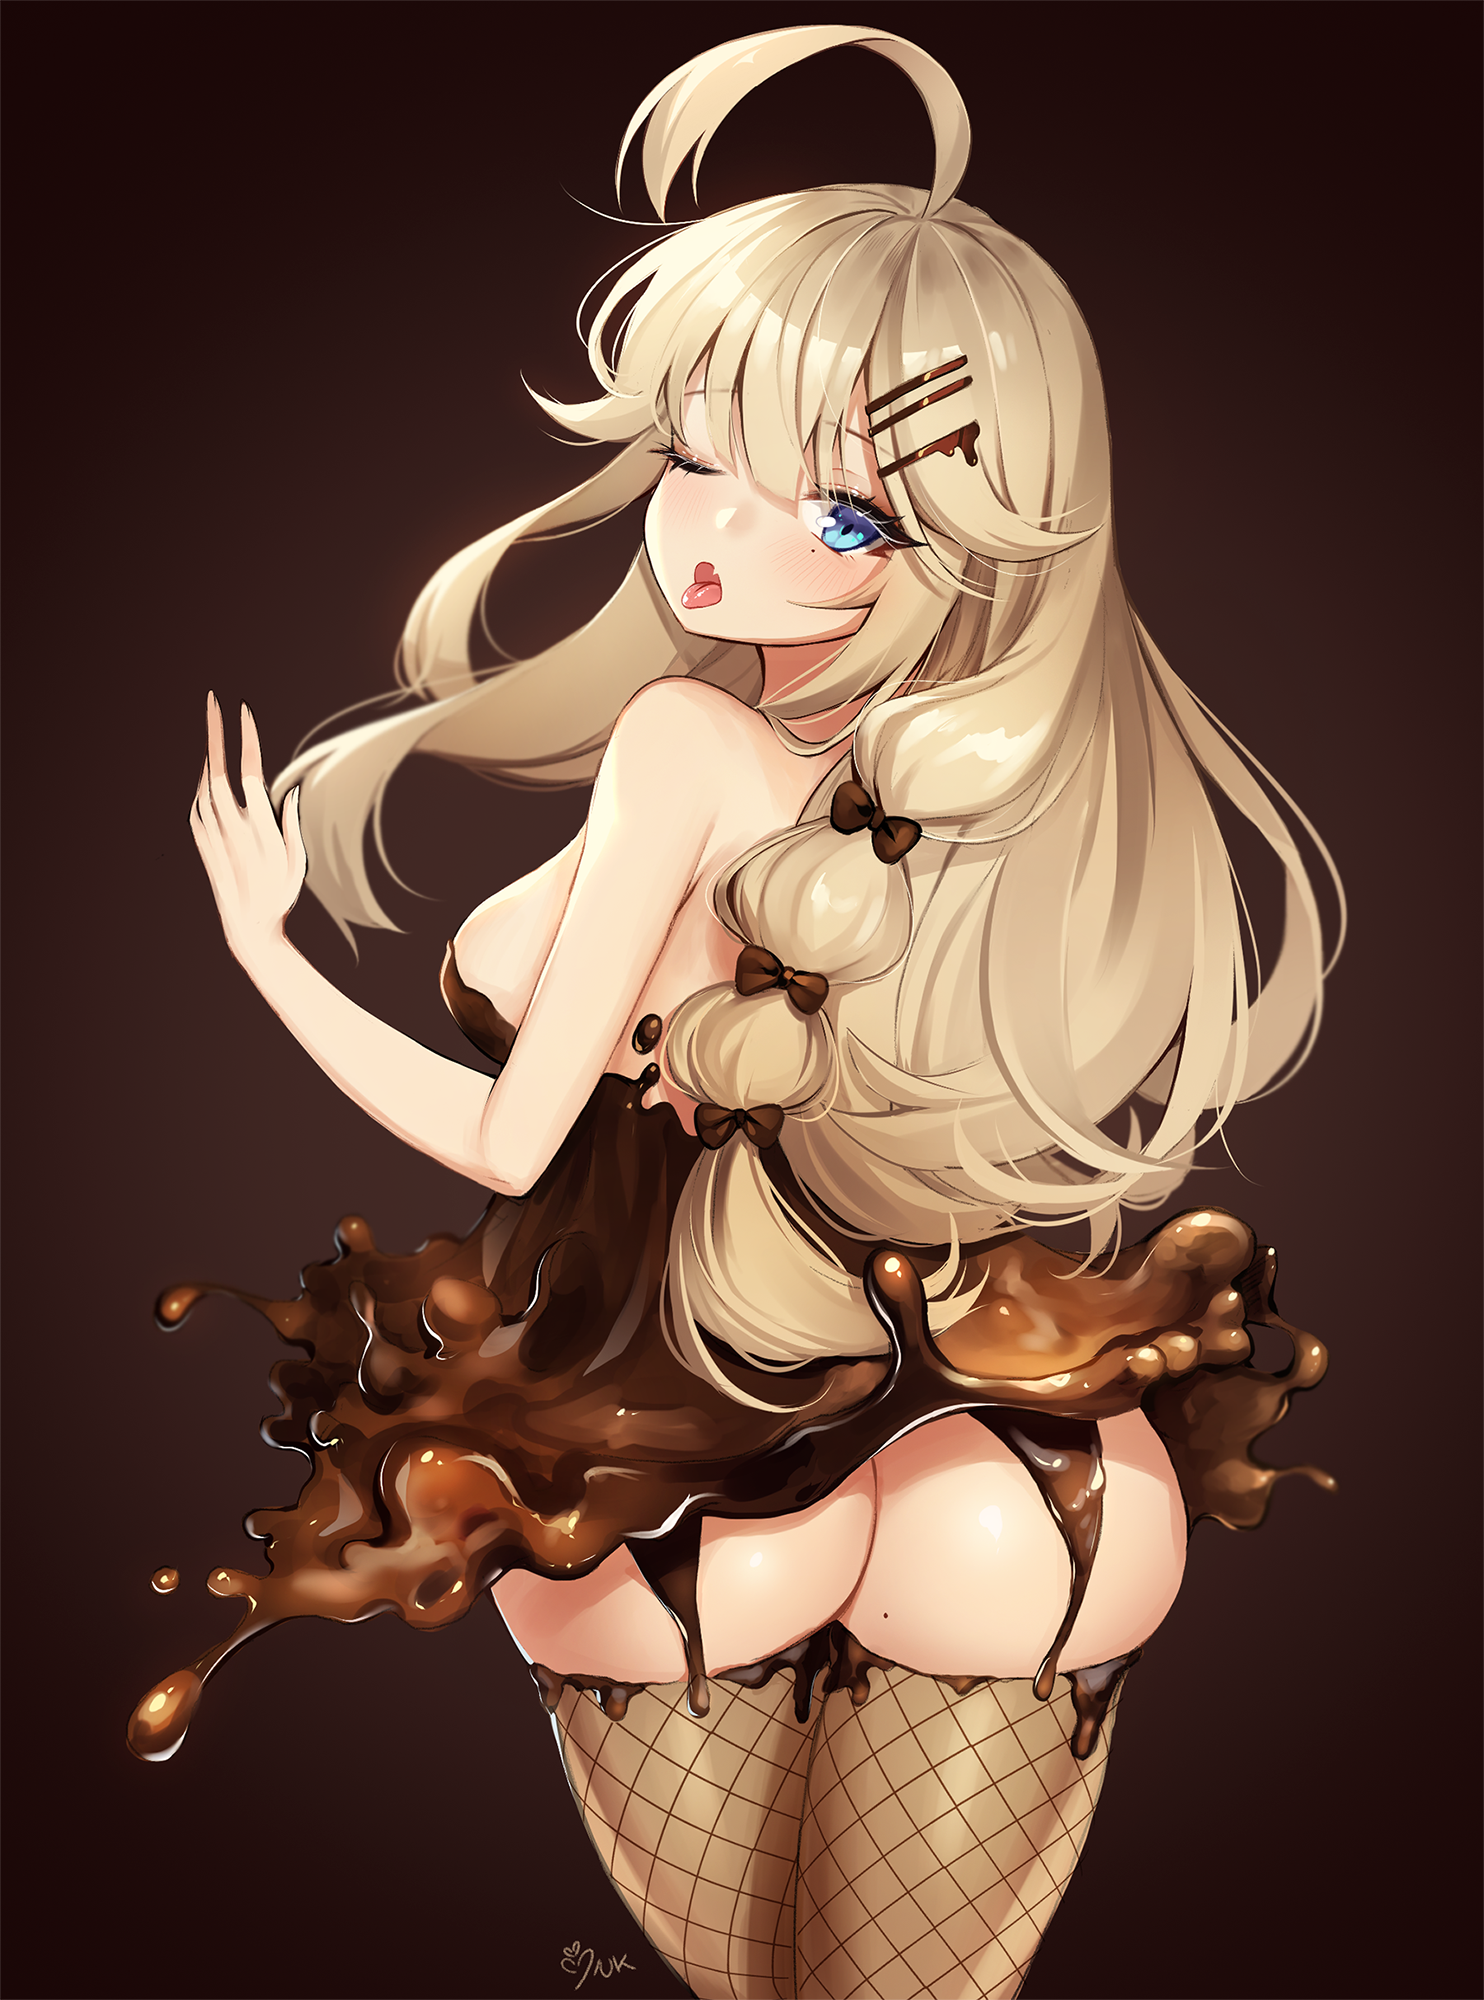 Anime 1484x2000 anime anime girls digital art artwork 2D portrait display Ankkoyom blonde blue eyes one eye closed tongue out looking back chocolate dress ass standing bare shoulders fishnet stockings